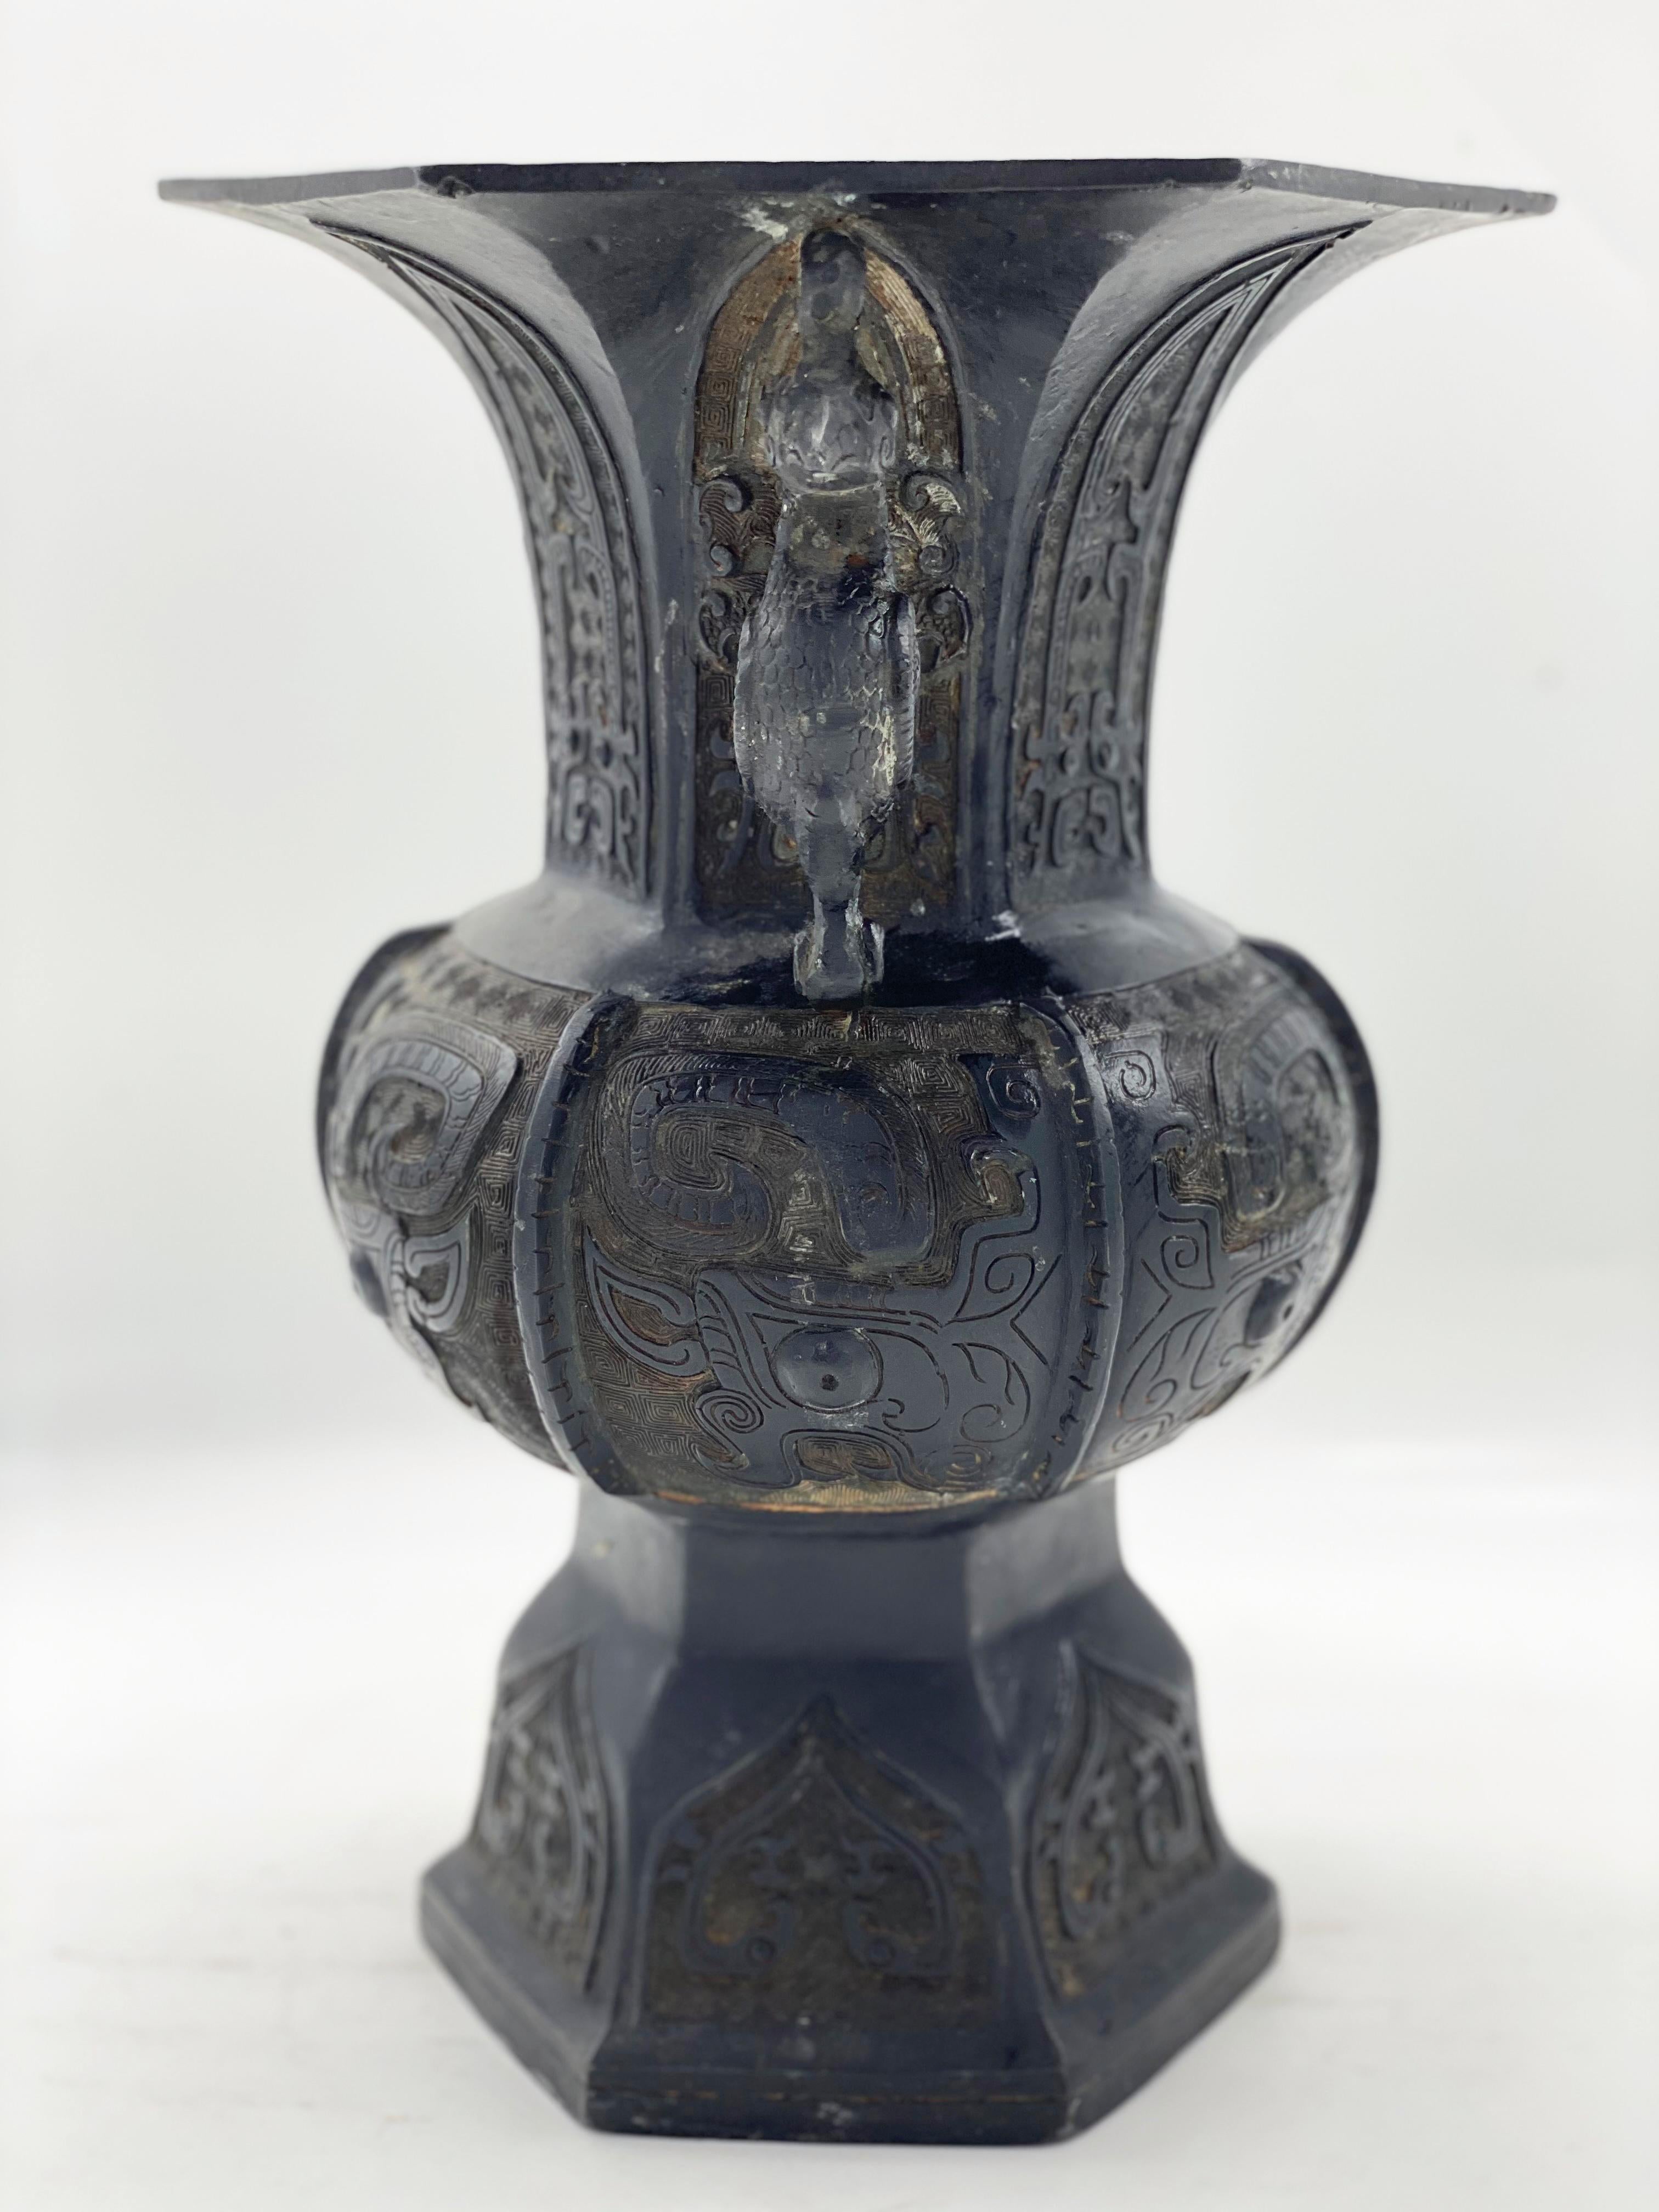 Double handle embossed Chinese bronze vase, phoenix handles, with geometric decoration of archaic inspiration, early Ming dynasty, 17th century. With a beautiful rich and antique dark patina.
The vase has a round belly that tapers upwards into a